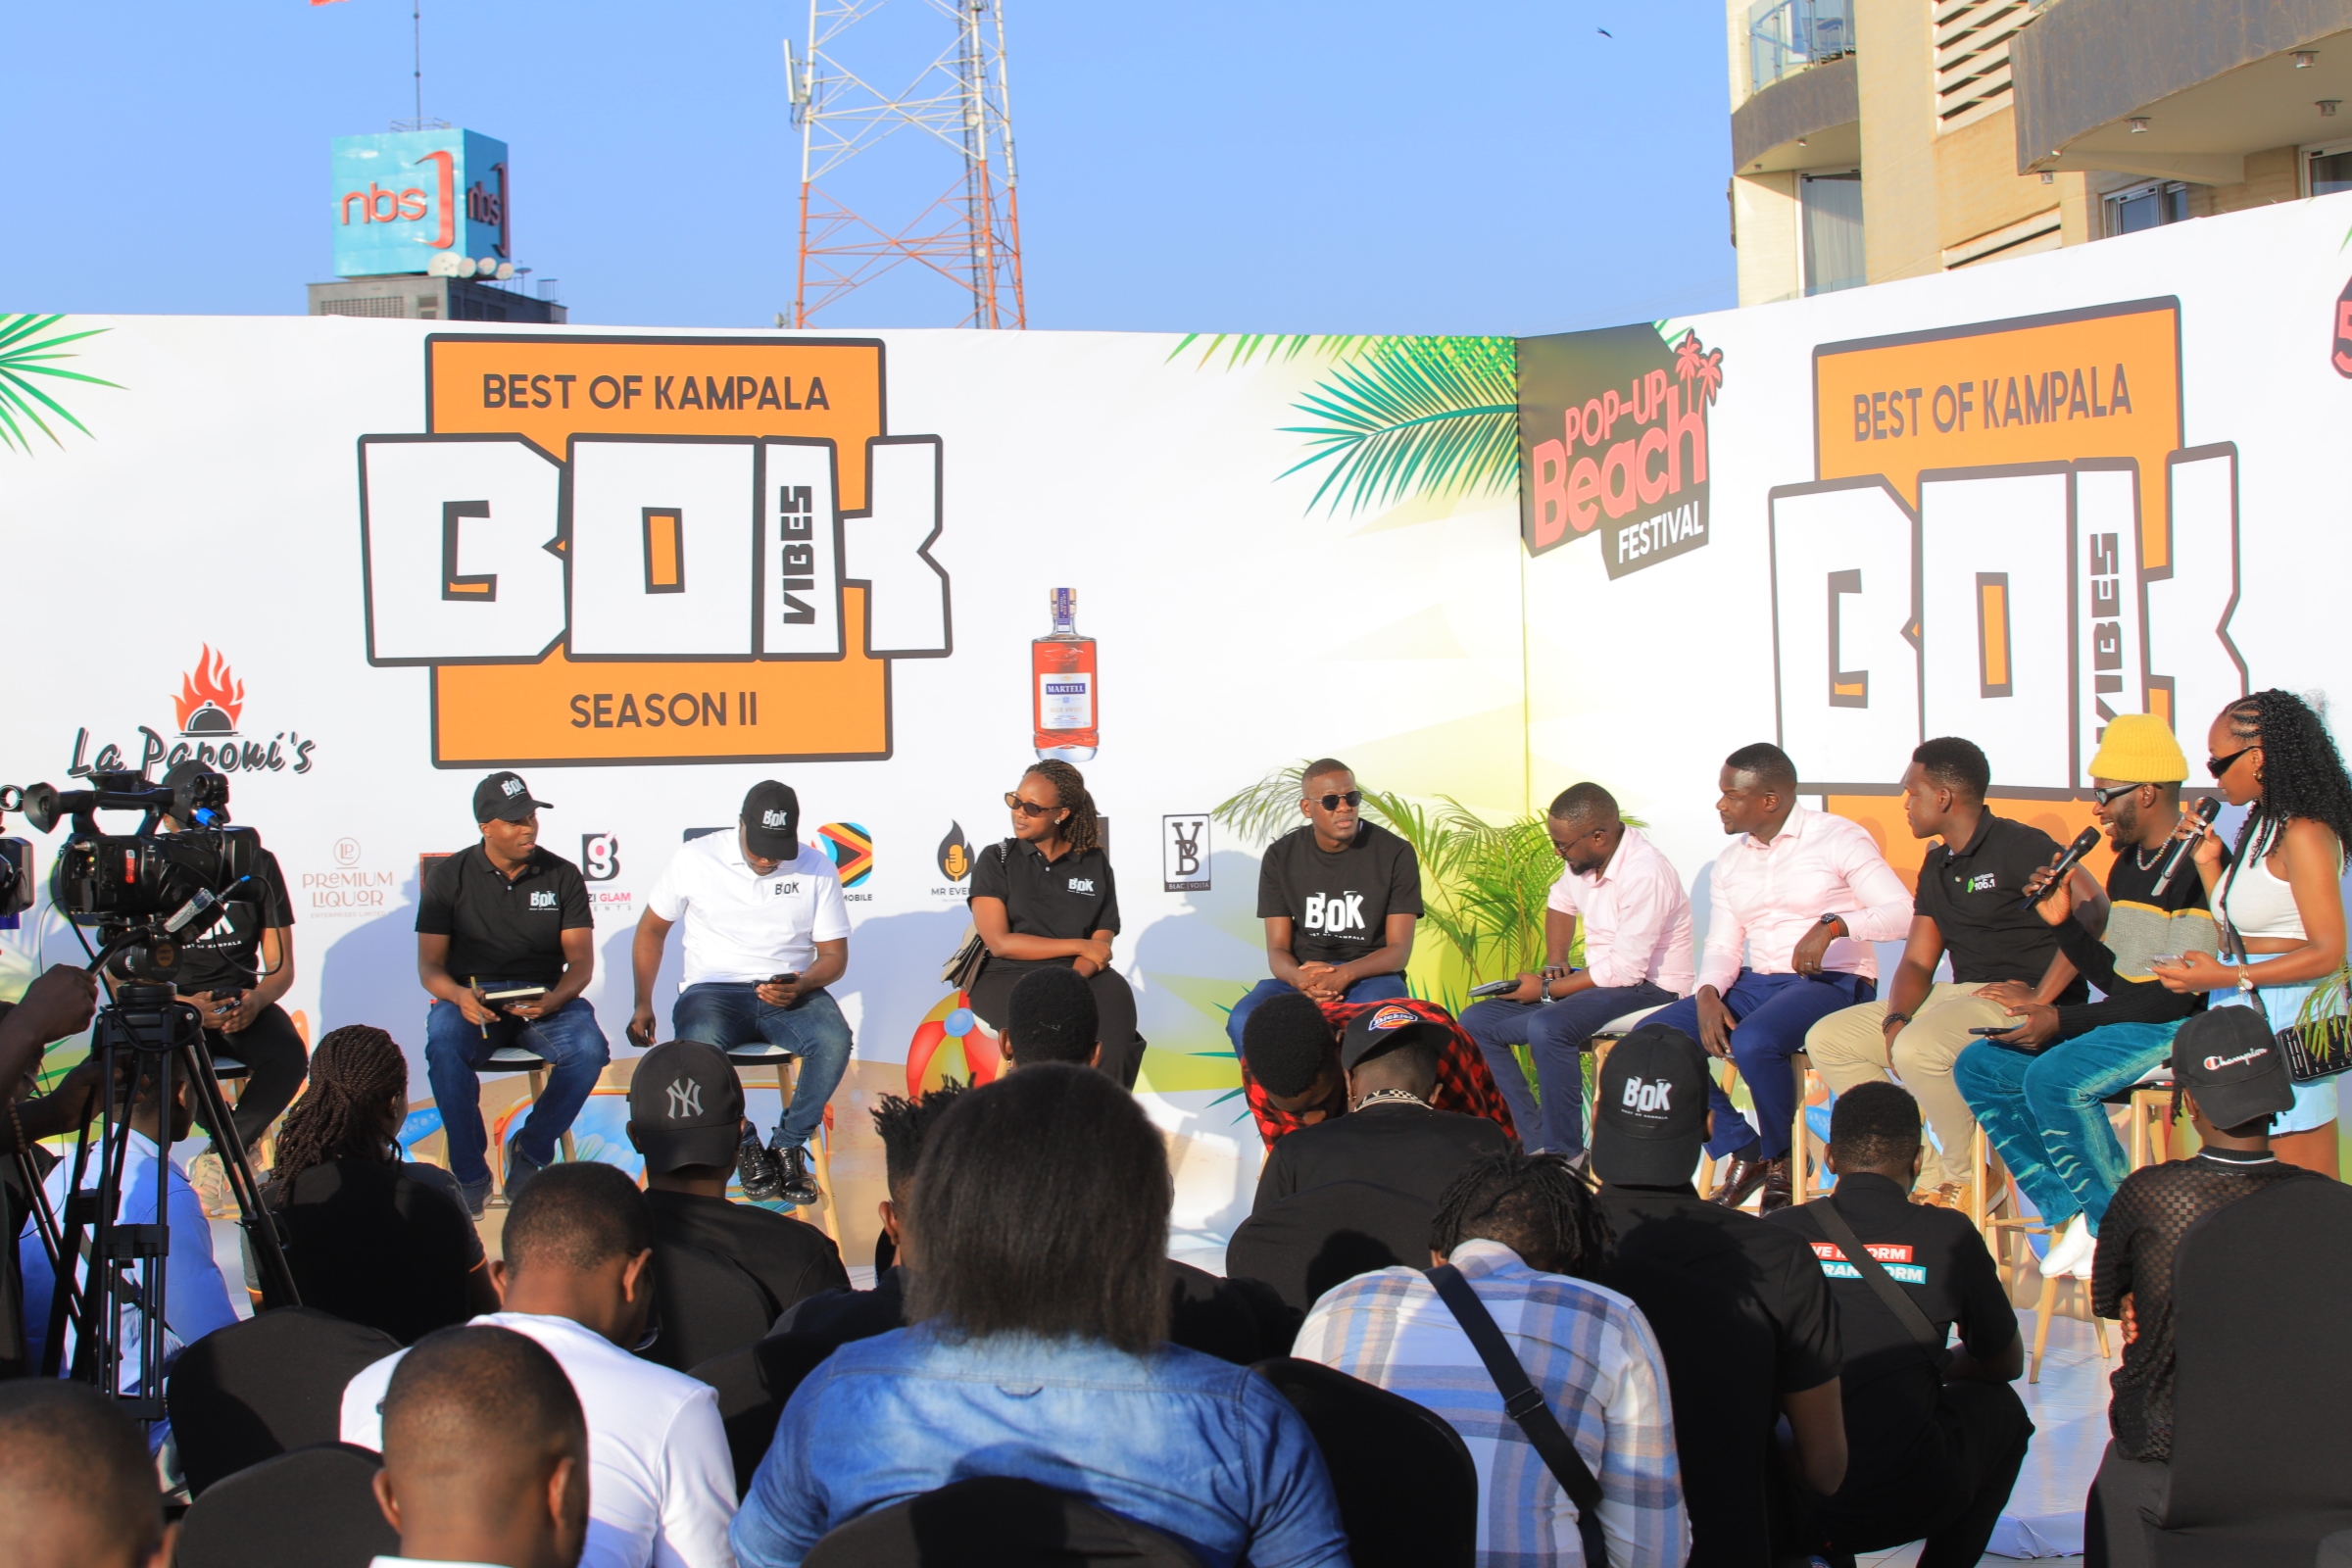 B.O.K Set to Return with Unforgettable Pop-Up Beach Festival, to Feature Africa’s Top DJs and Artists